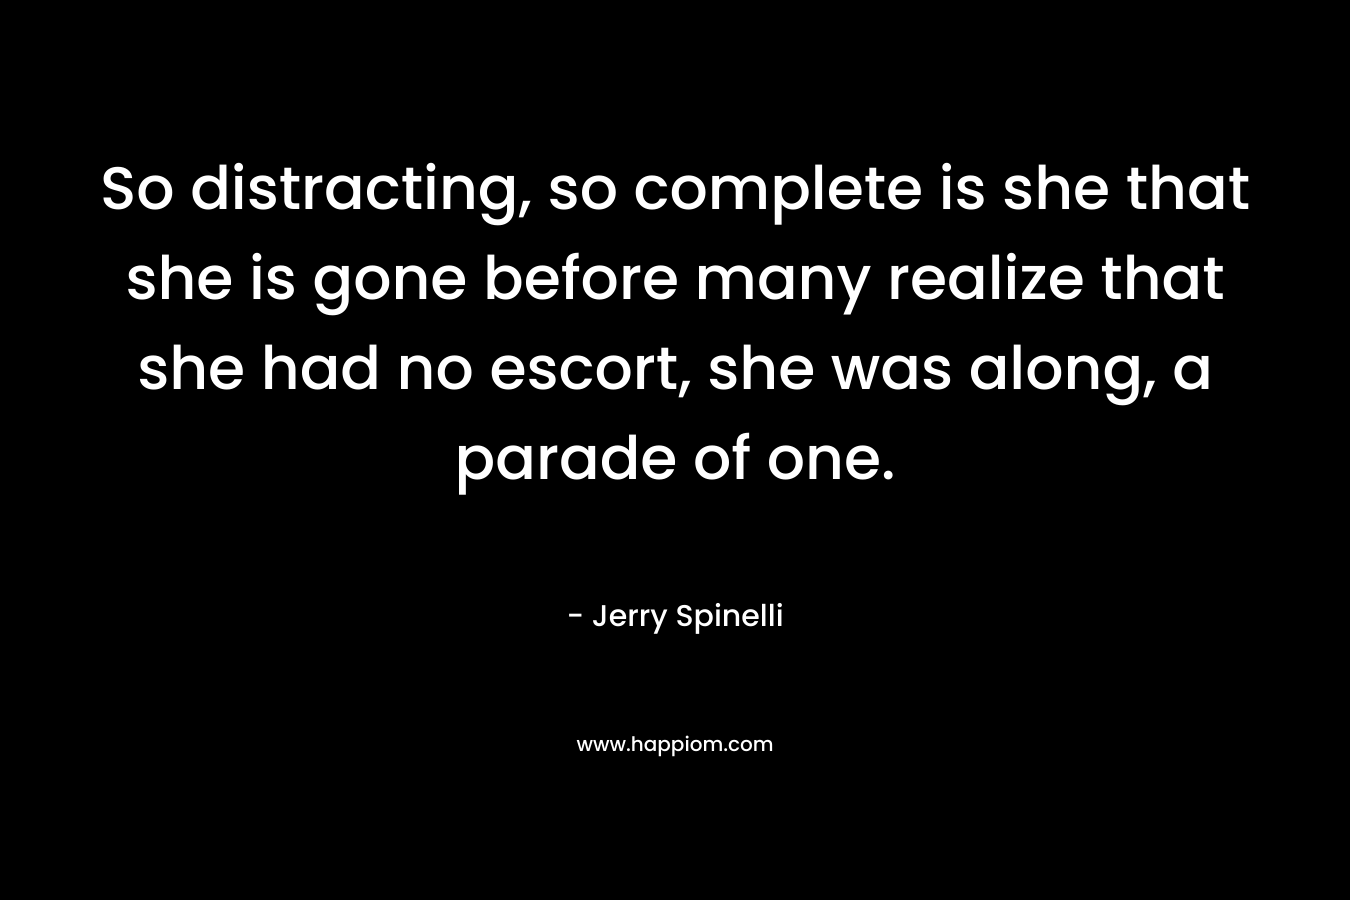 So distracting, so complete is she that she is gone before many realize that she had no escort, she was along, a parade of one. – Jerry Spinelli